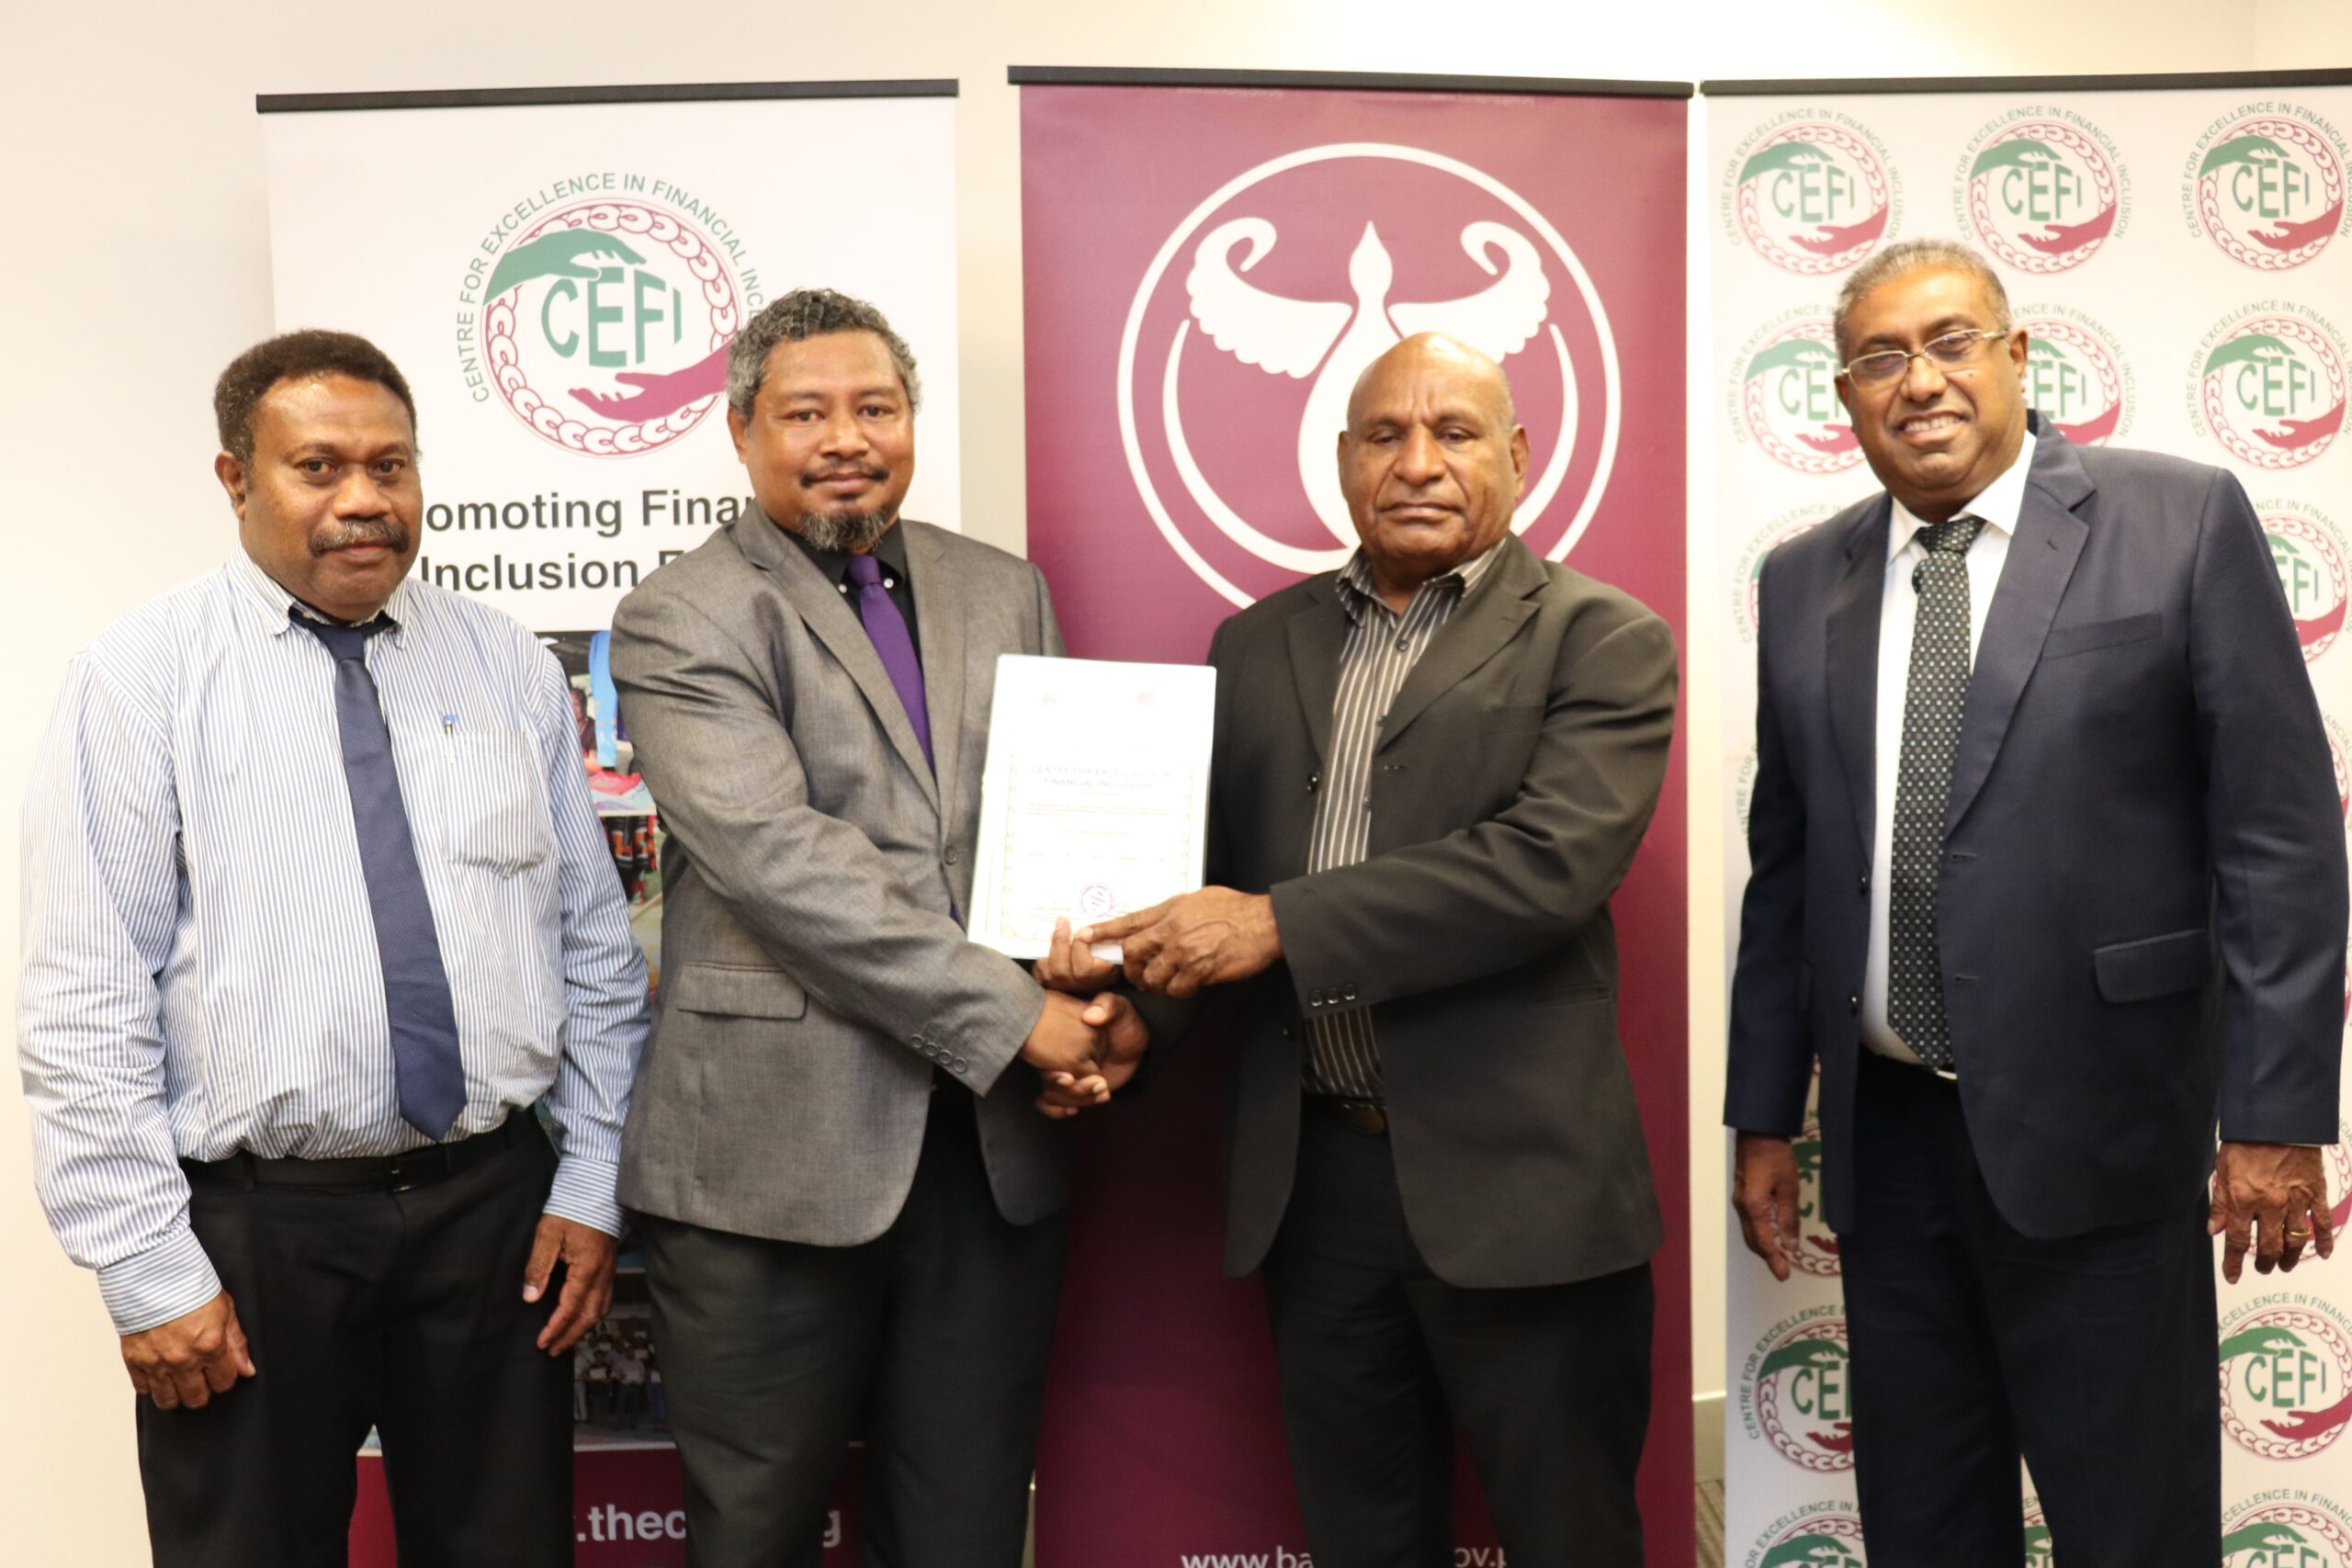 NTC Director Kinsella Geoffrey (2nd left) presenting the certificates to Acting Assistant Governor, Financial System Stability Group (FSSG), Bank of Papua New Guinea, George Awap witnessed by NTC Assistant Director Kevin Kalis (far left) and CEFI Executive Director Saliya Ranasinghe.